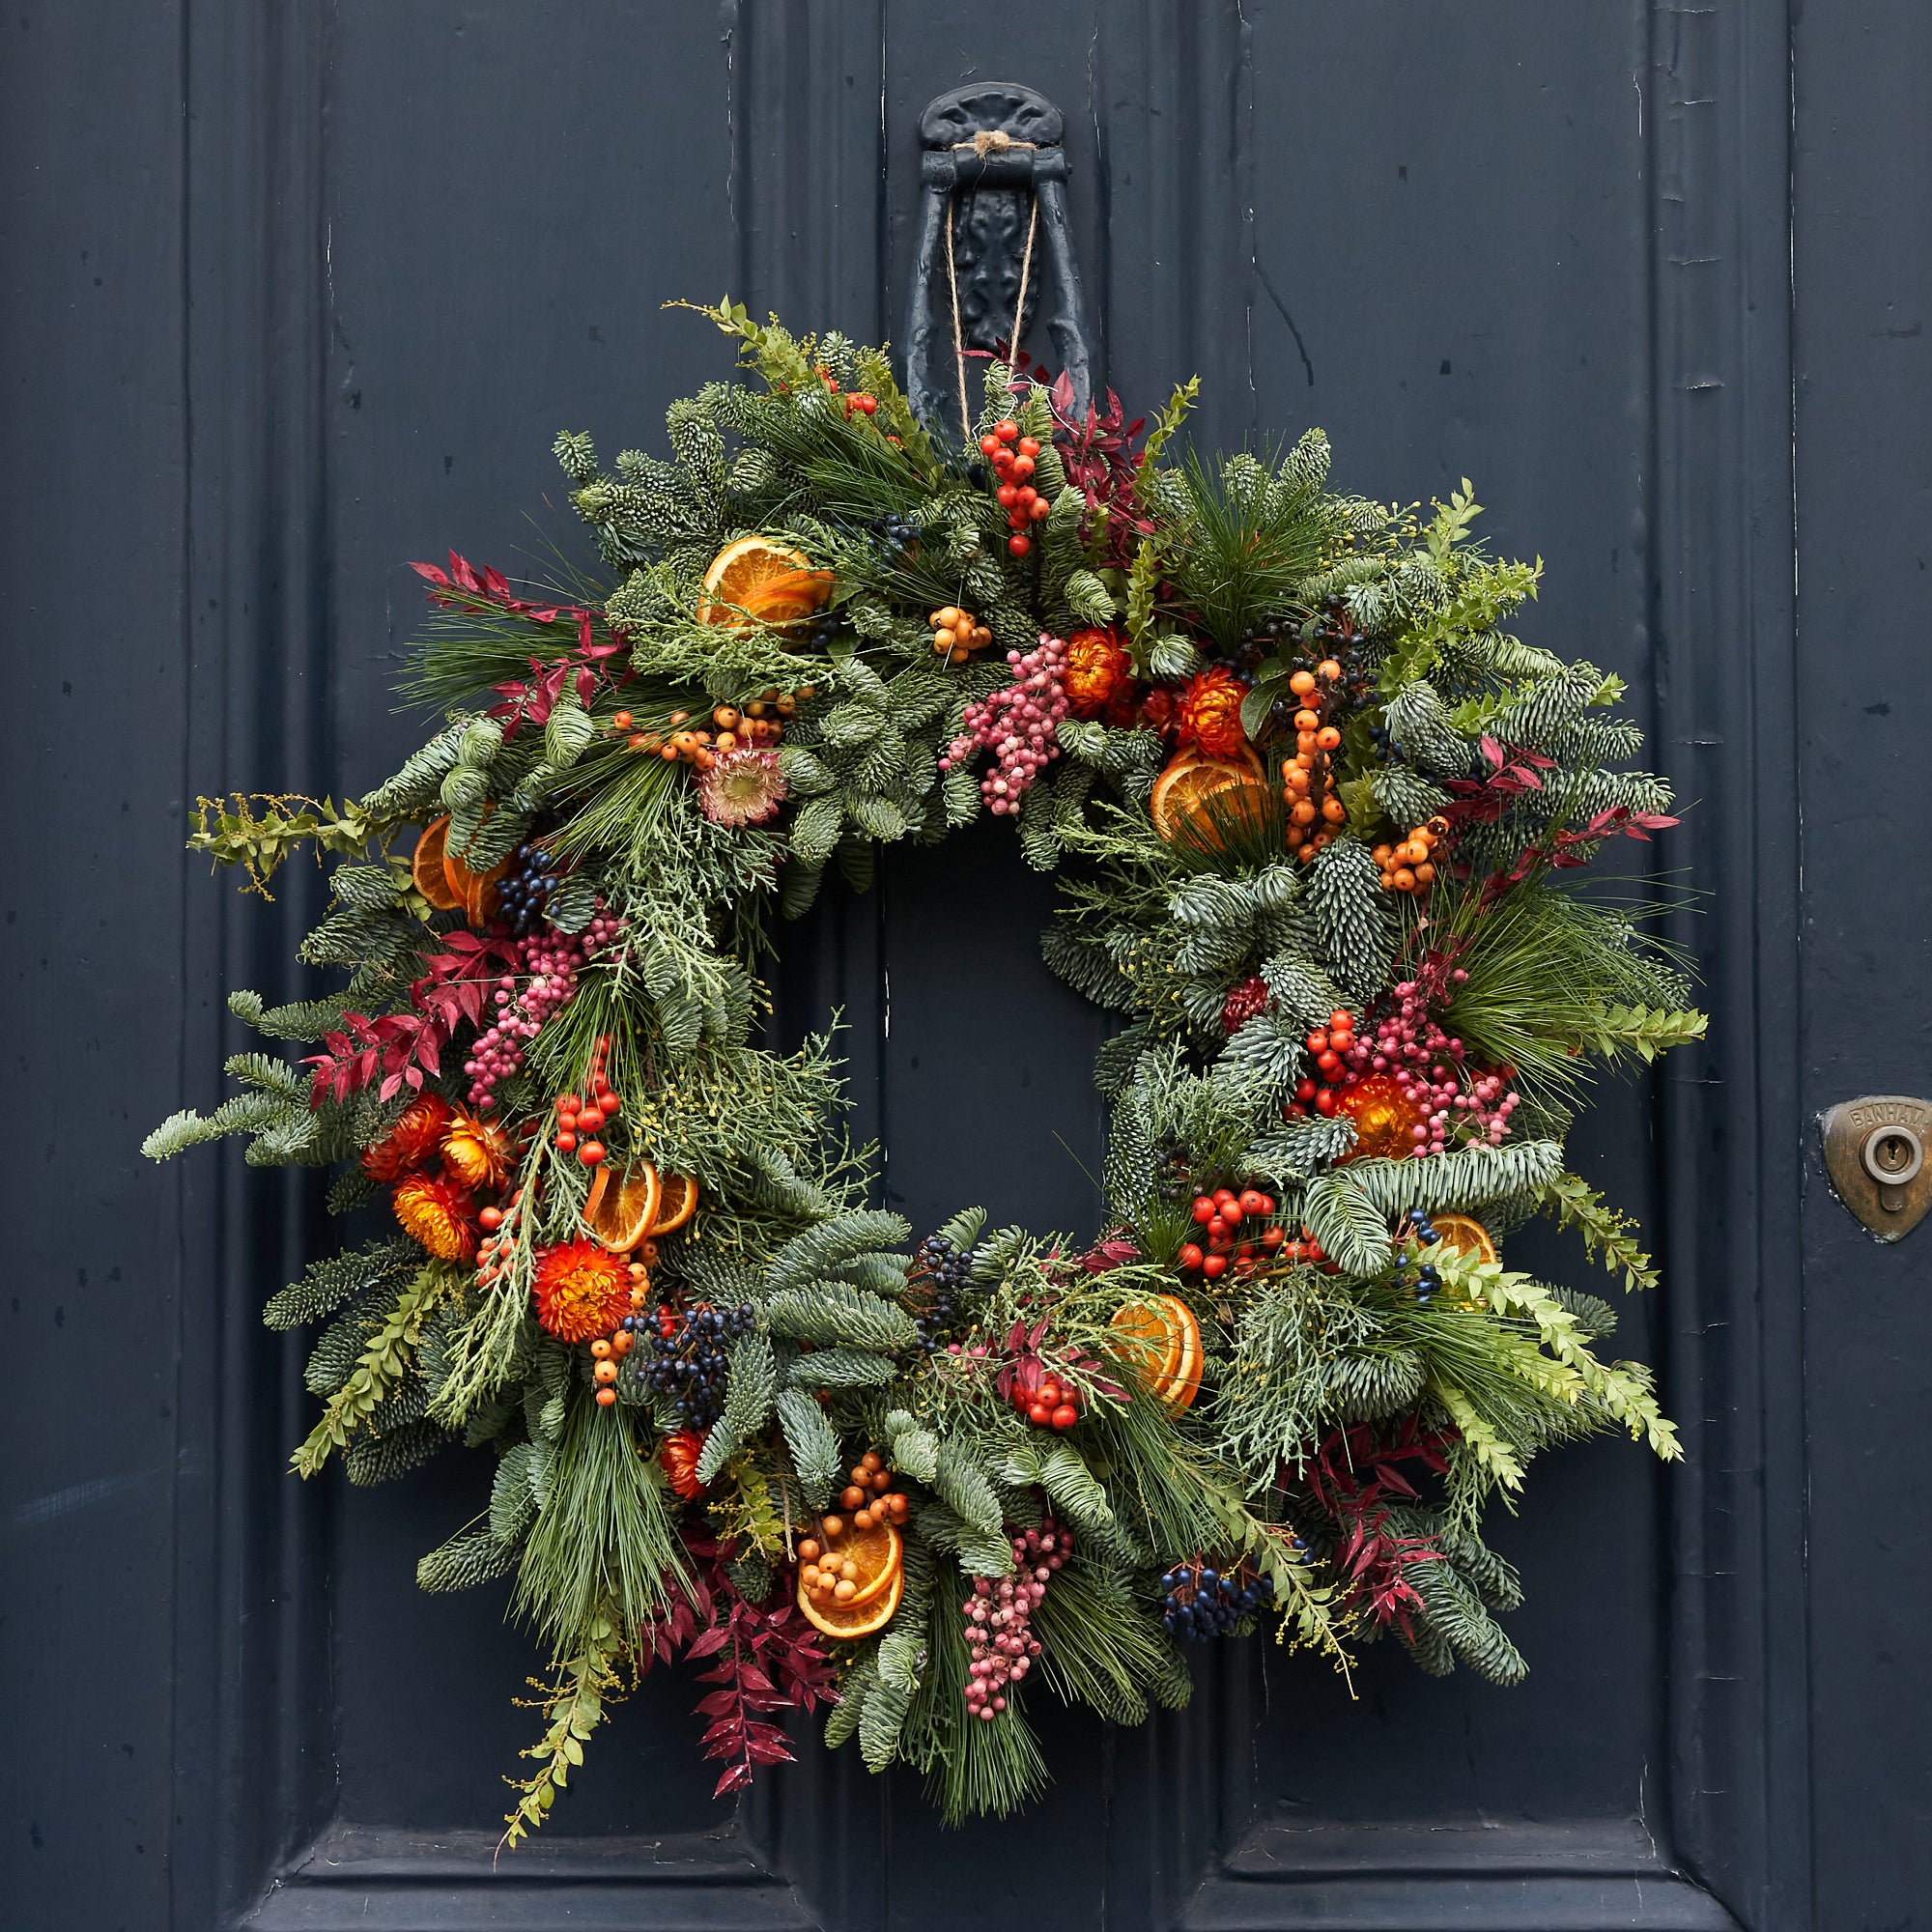 Here's How to Care for Your Christmas Wreath (& Make it Last Longer!)